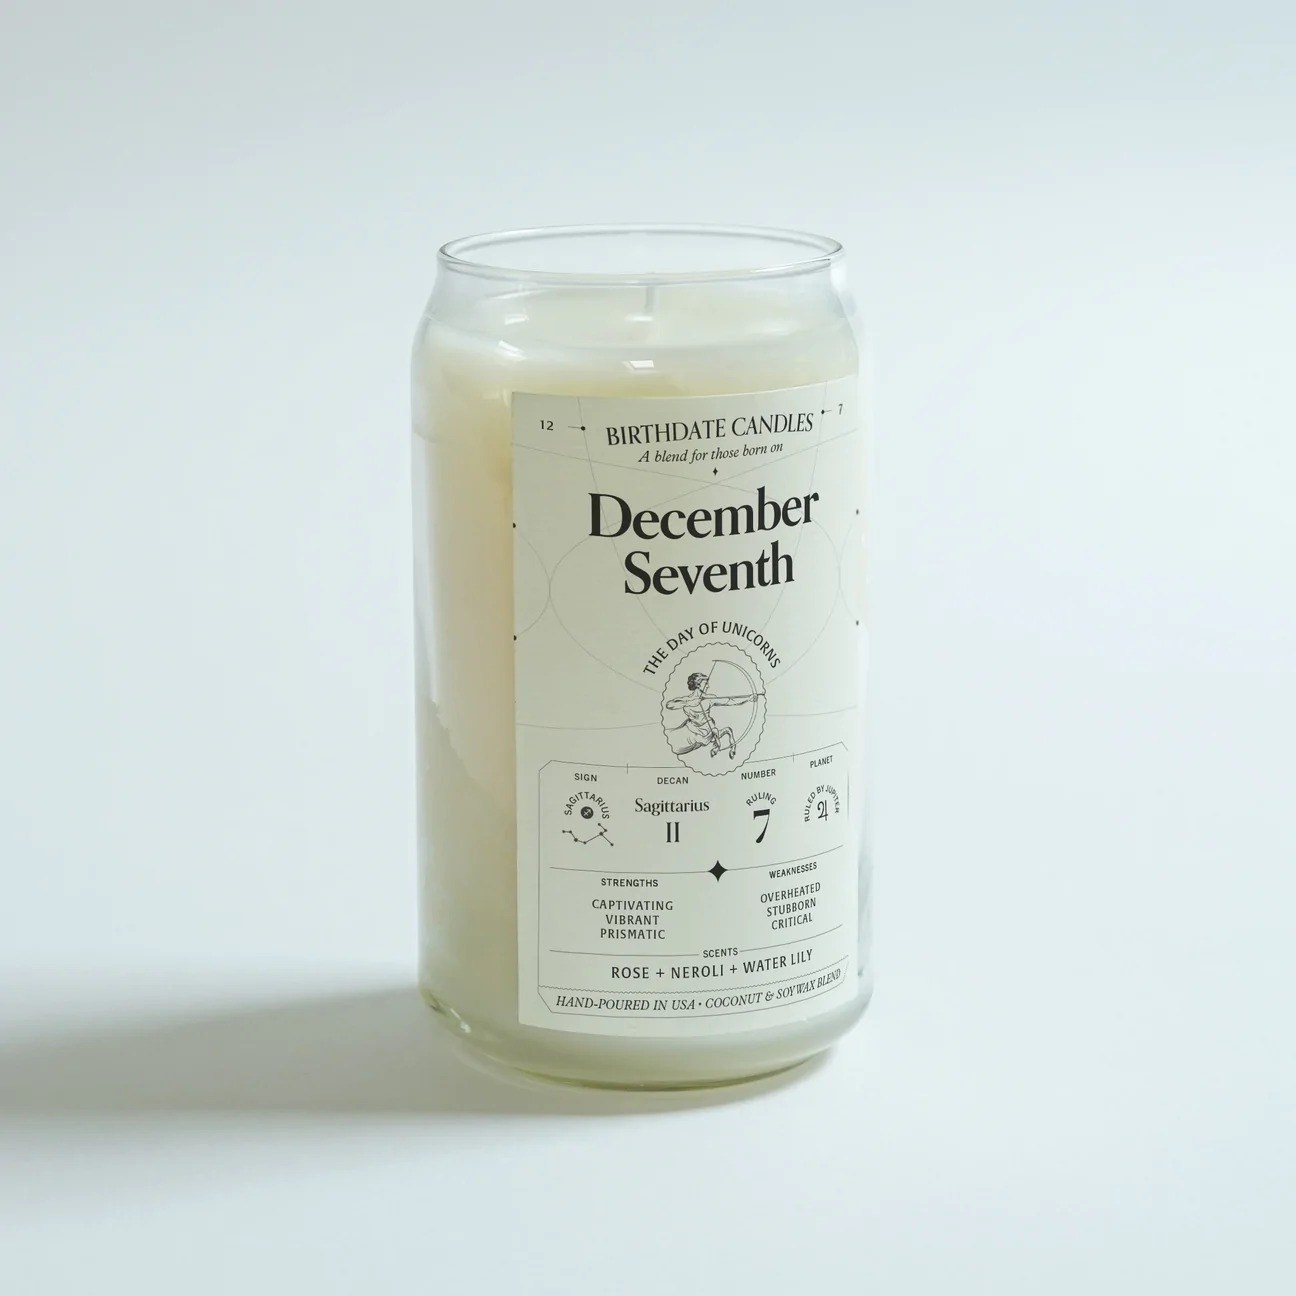 Birthdate candle for December seventh